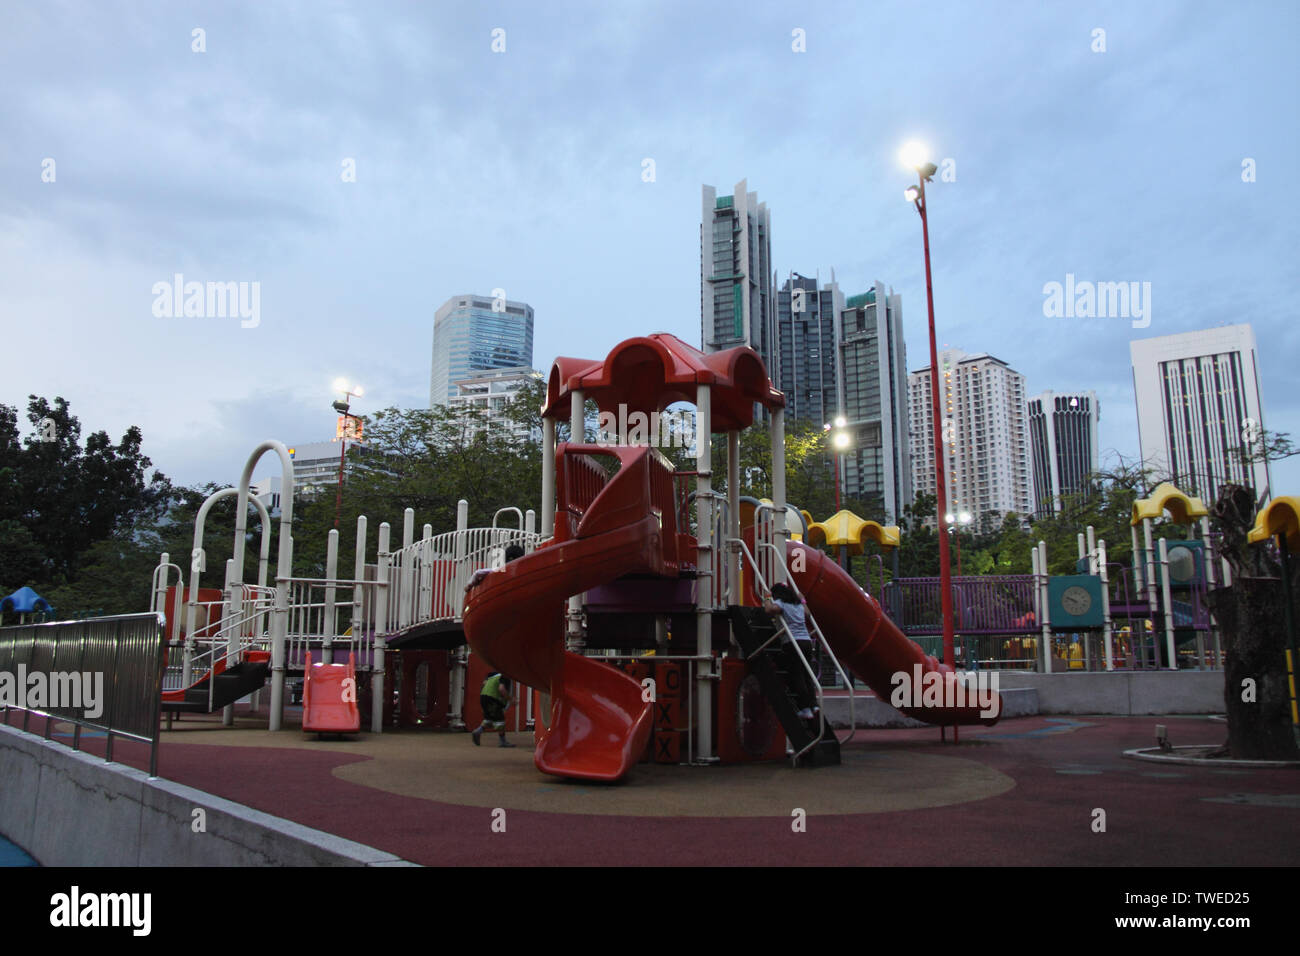 Slide in a playground with skyline in the background, Kuala Lumpur, Malaysia Stock Photo